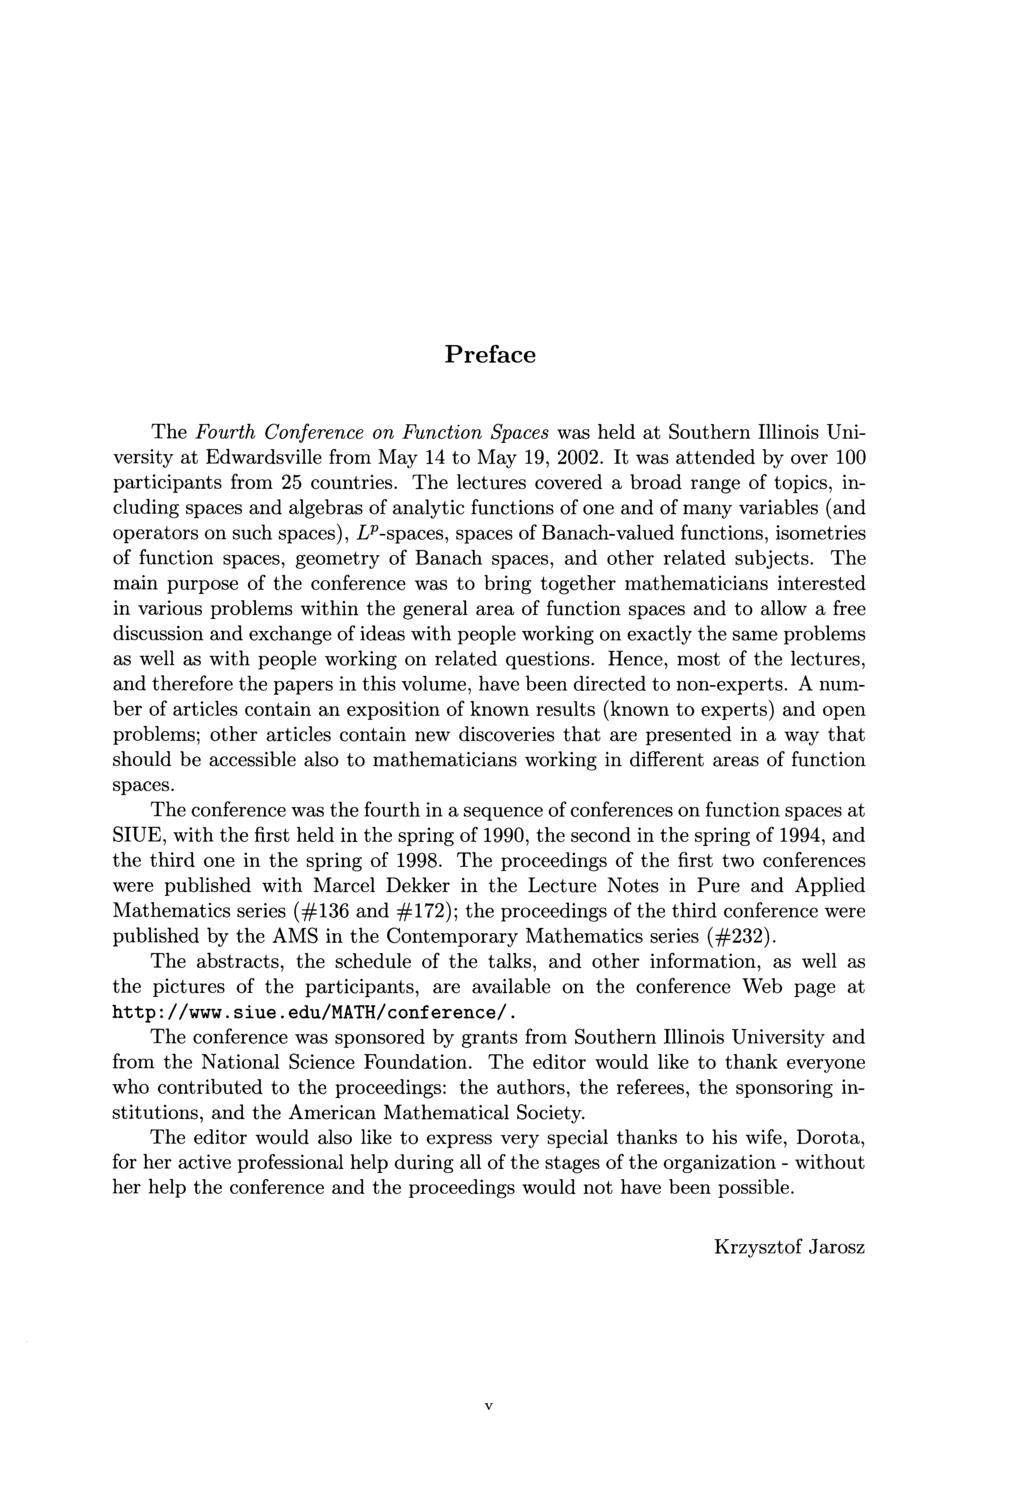 Preface The Fourth Conference on Function Spaces was held at Southern Illinois University at Edwardsville from May 14 to May 19, 2002. It was attended by over 100 participants from 25 countries.